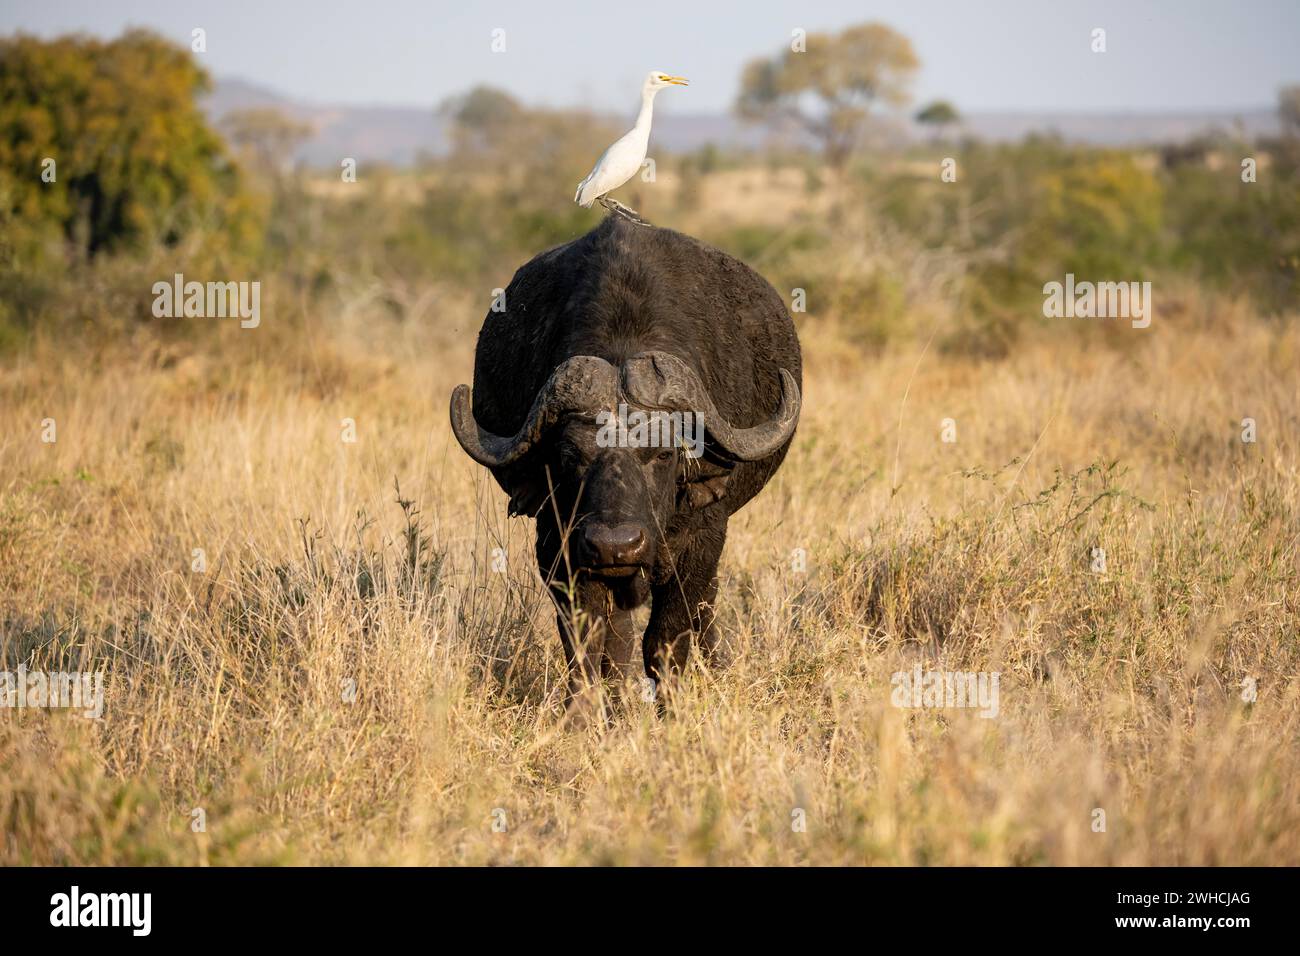 Cattle egret (Bubulcus ibis) sitting on the back of a african buffalo (Syncerus caffer caffer), bull standing in dry grass, African savannah, funny Stock Photo